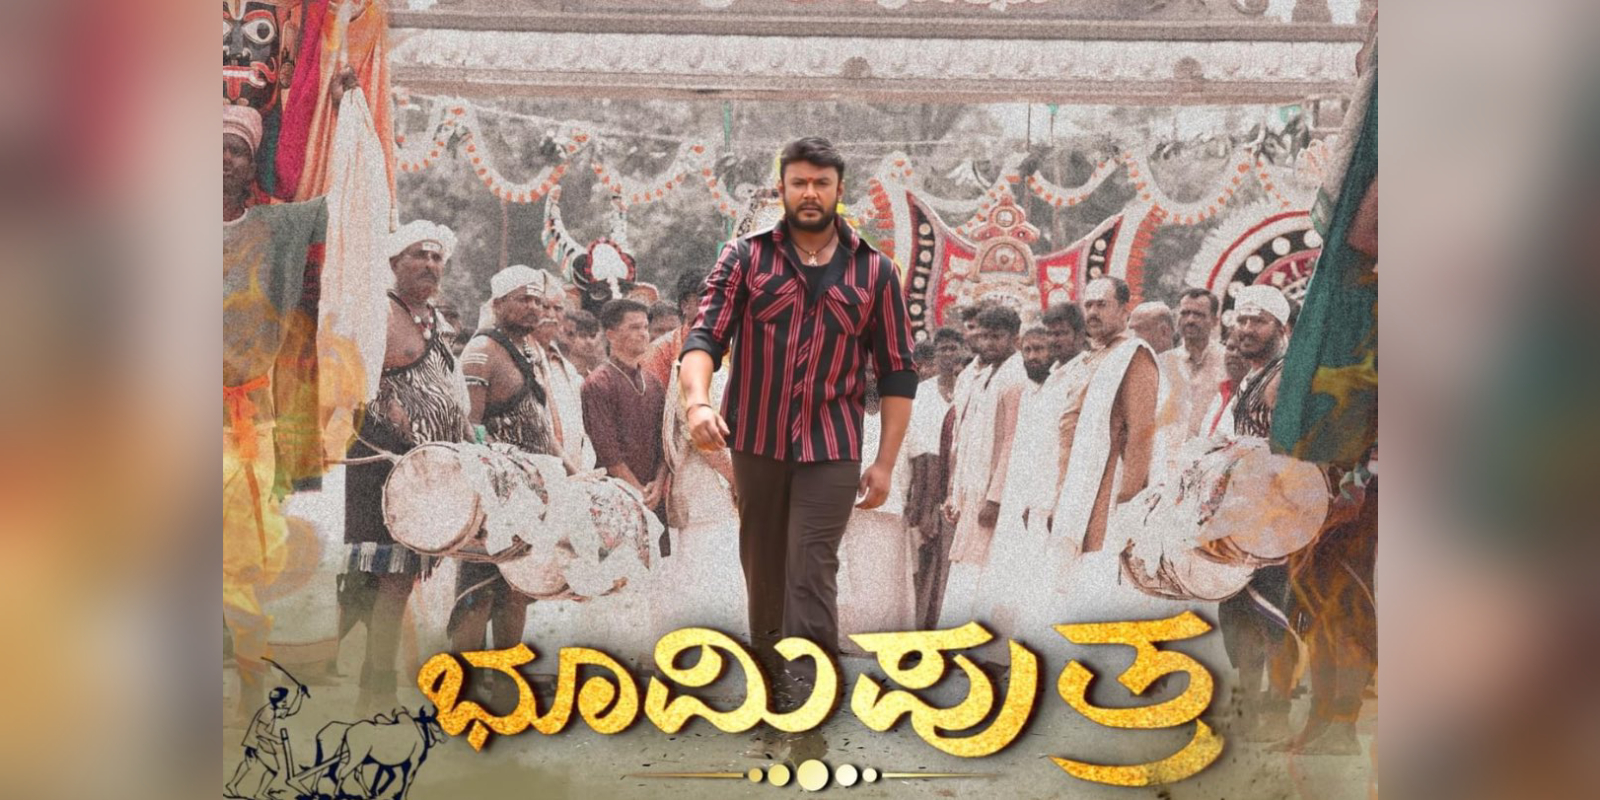 Darshan has been honoured with the title 'Bhoomi Putra'